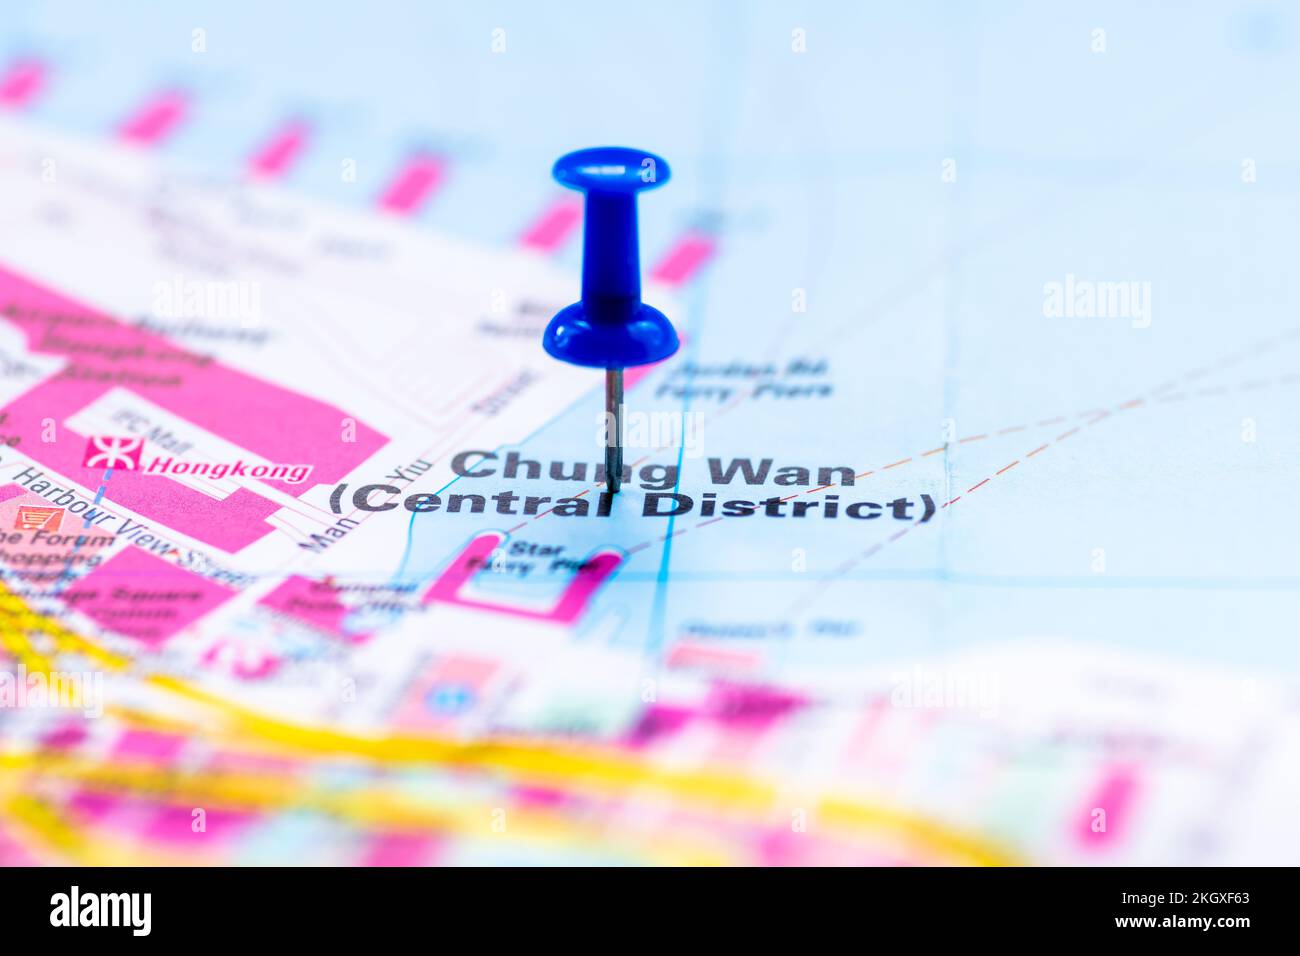 The map location of Central District on Hong kong island, China, marked by a blue pushpin. Stock Photo